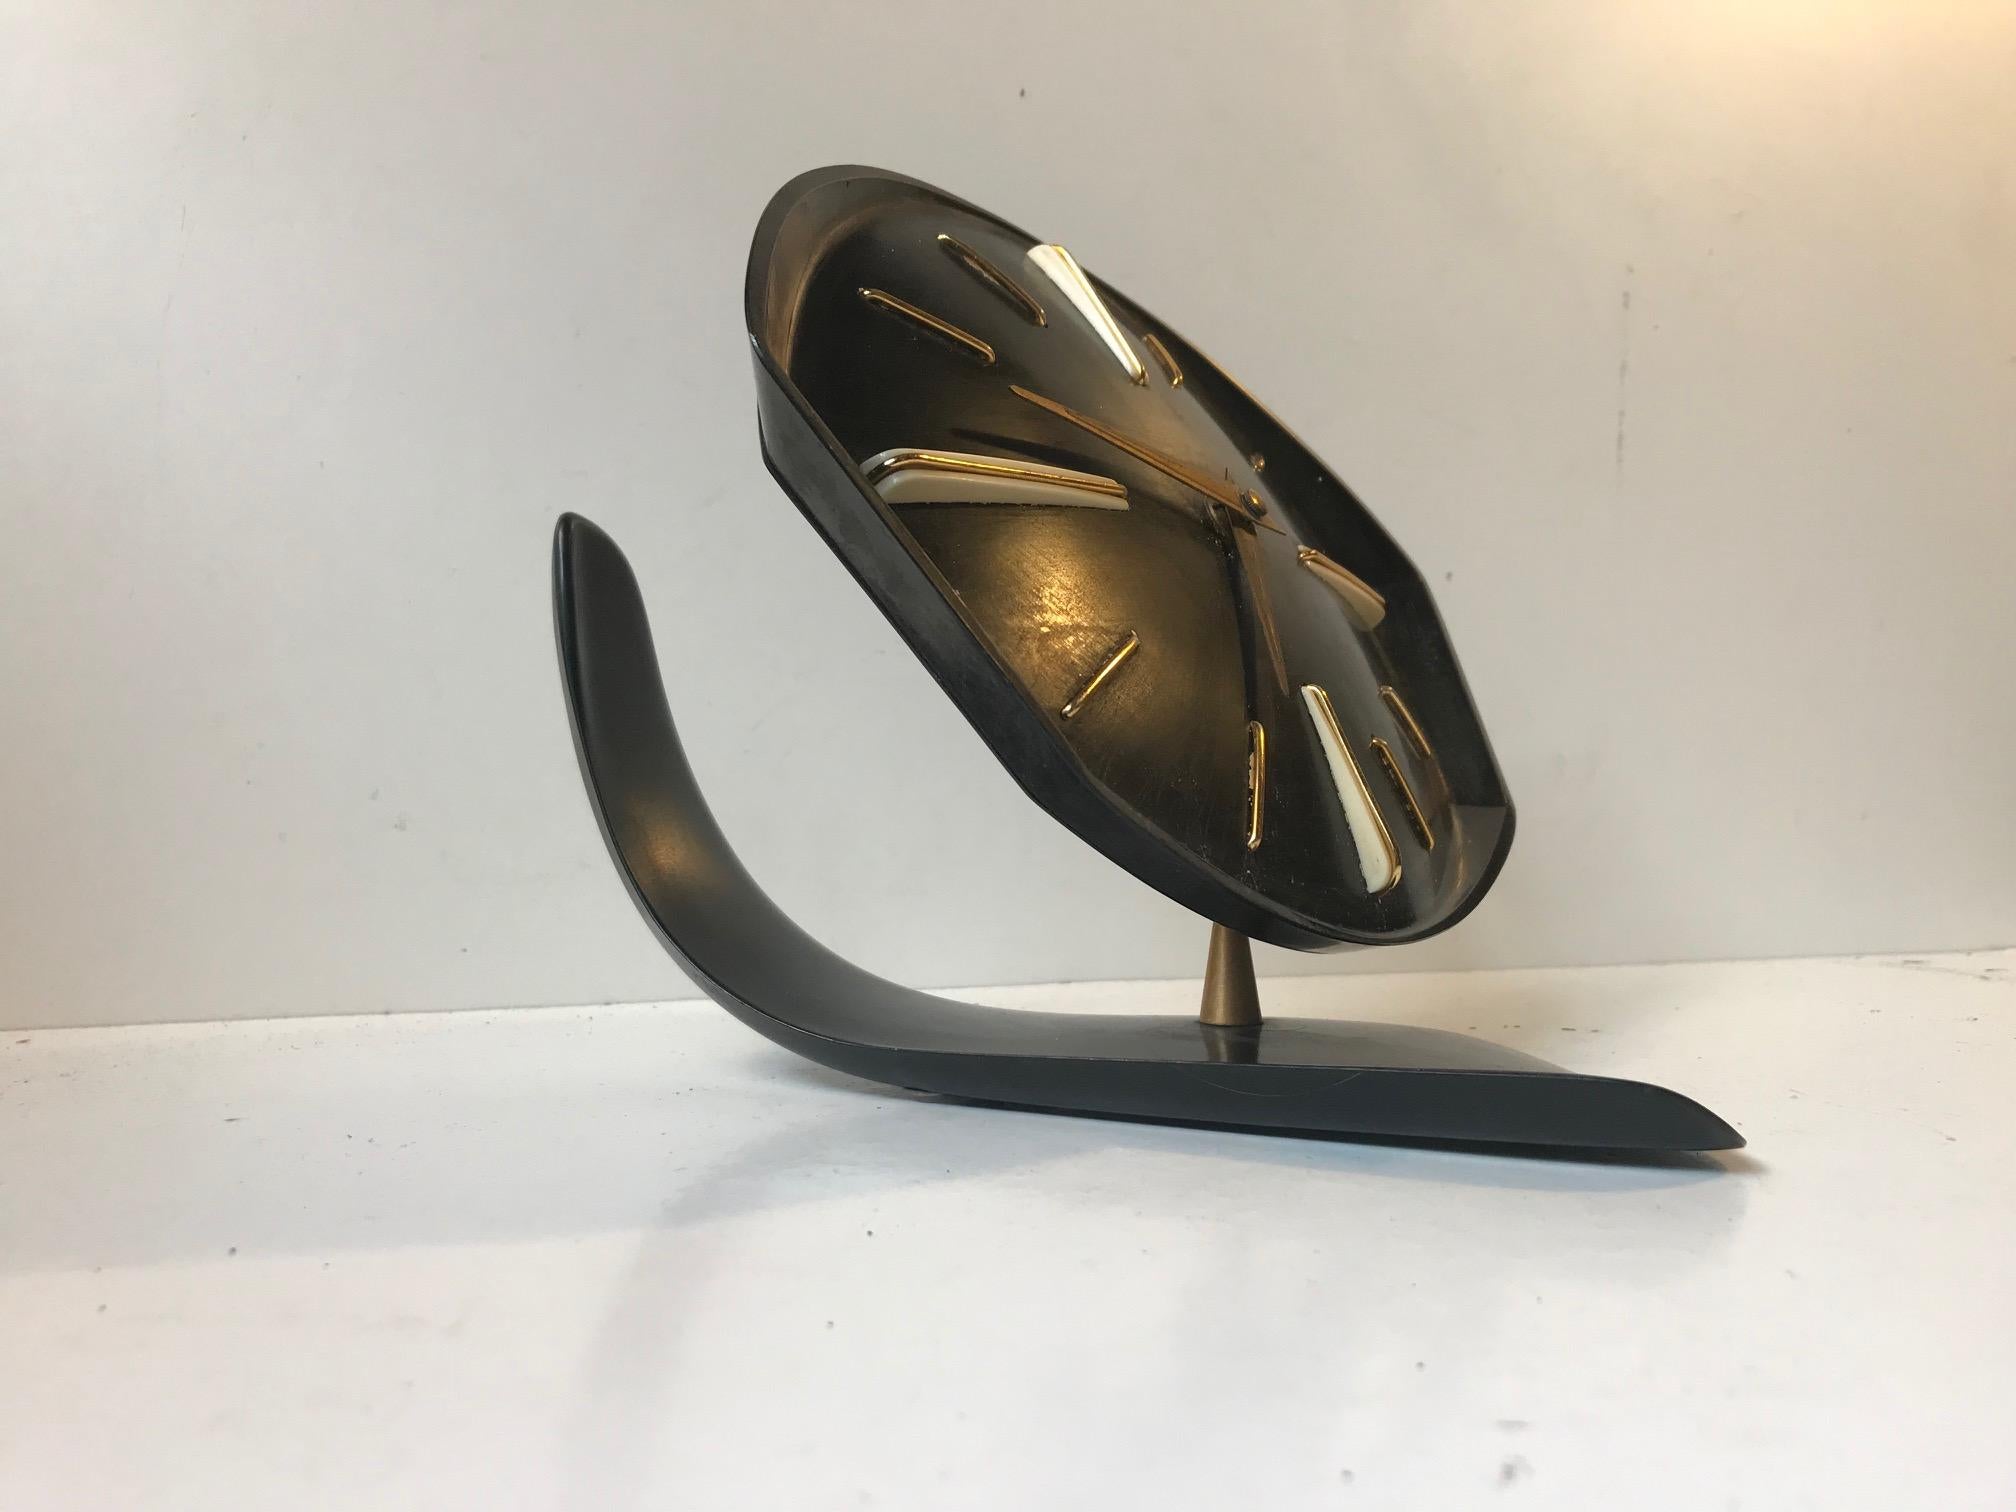 Vintage table clock manufactured by PRIM Clocks in the 1950s. Made of black Bakelite, the clock top is adjustable, standing on a brass ball. Original brass details and hands set on a black Bakelite clock face with beautiful details and lines typical